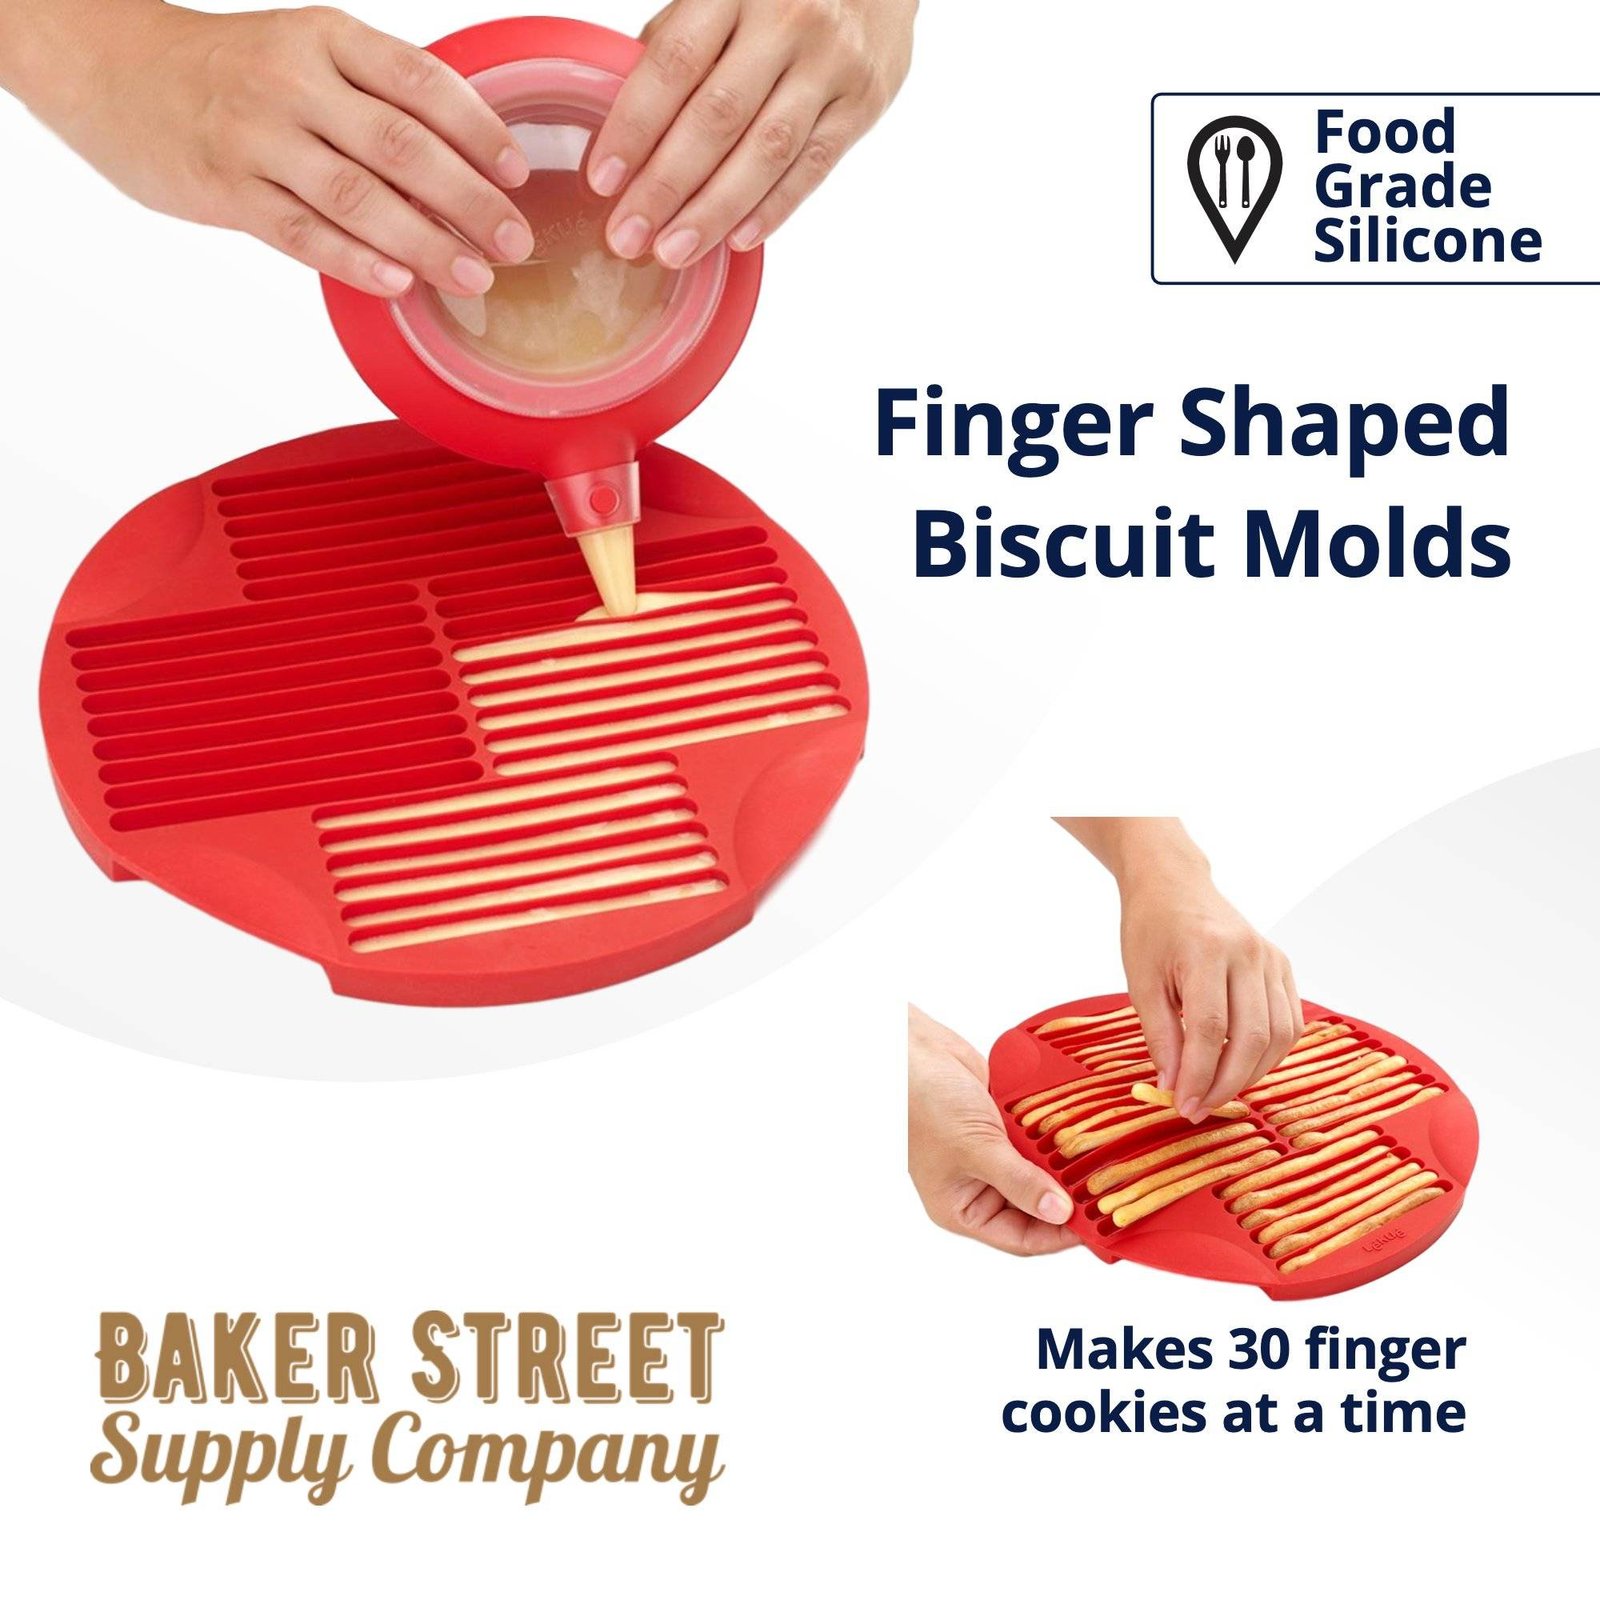 How to Make a Food Grade Silicone Mold with Pictures - Windy City Baker